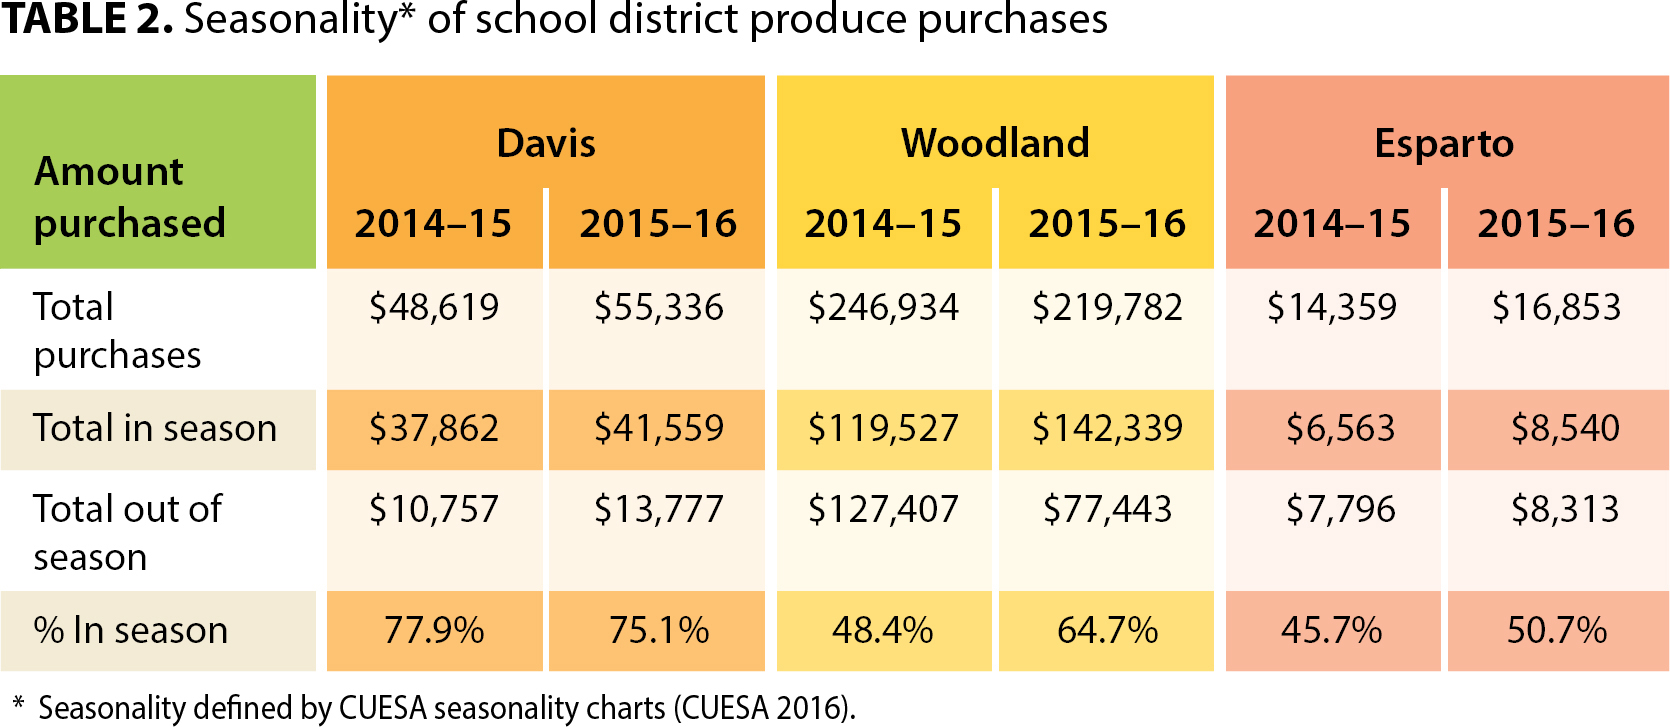 Seasonality* of school district produce purchases